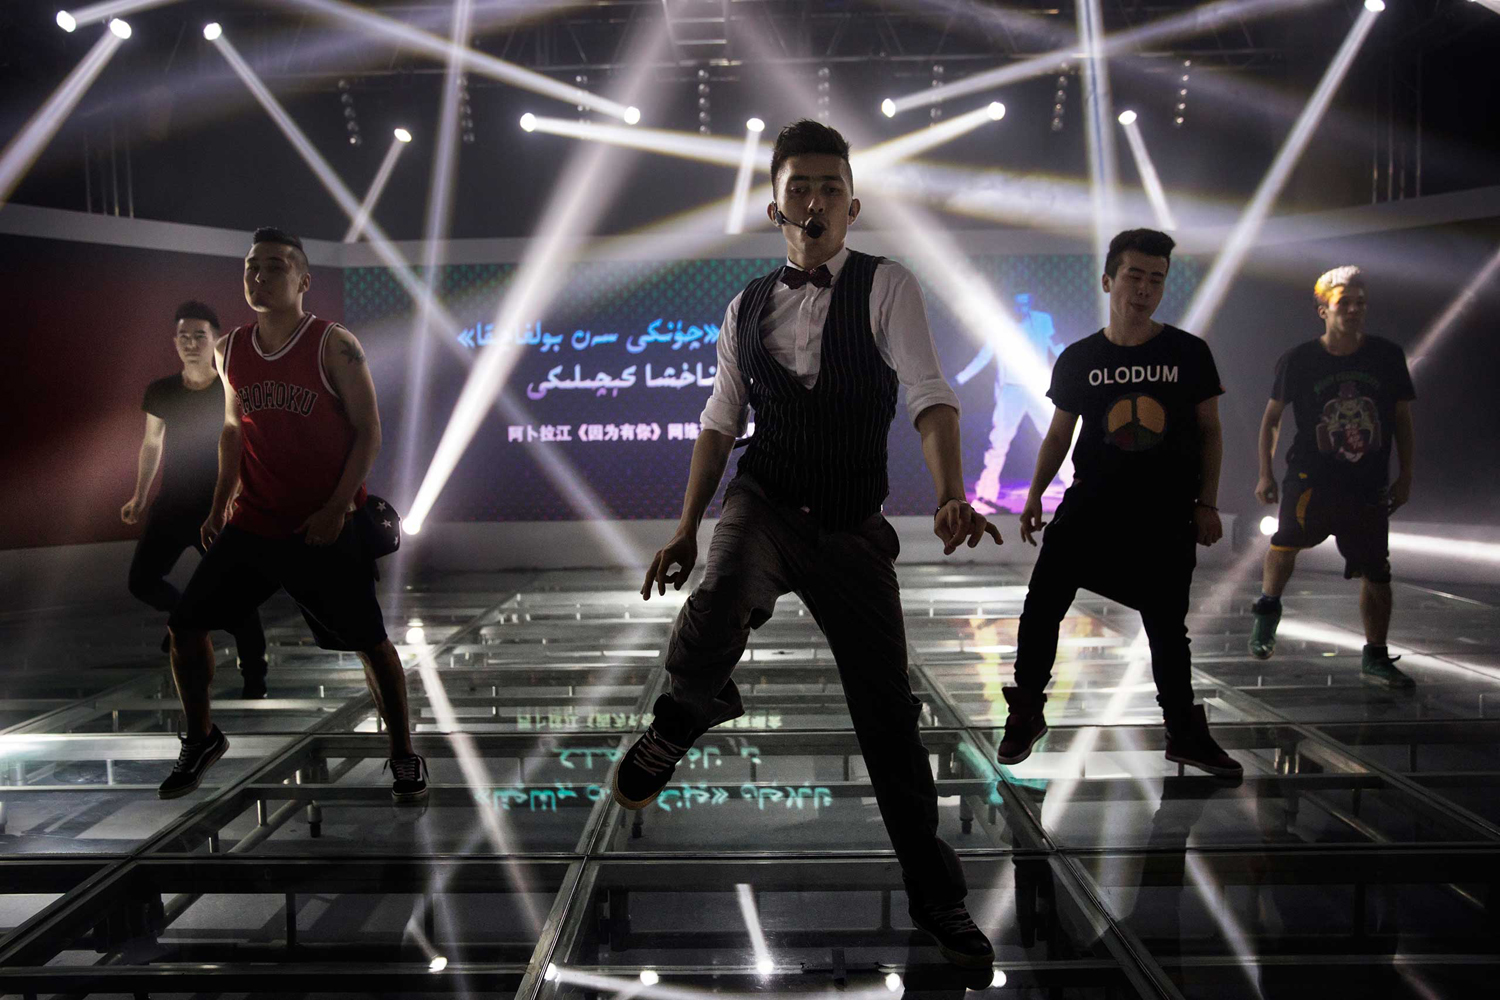 Uighur pop star Ablajan performs on stage with his dancers at rehearsals for a planned live webcast concert scheduled for that afternoon in Urumqi, China on July 31, 2014.